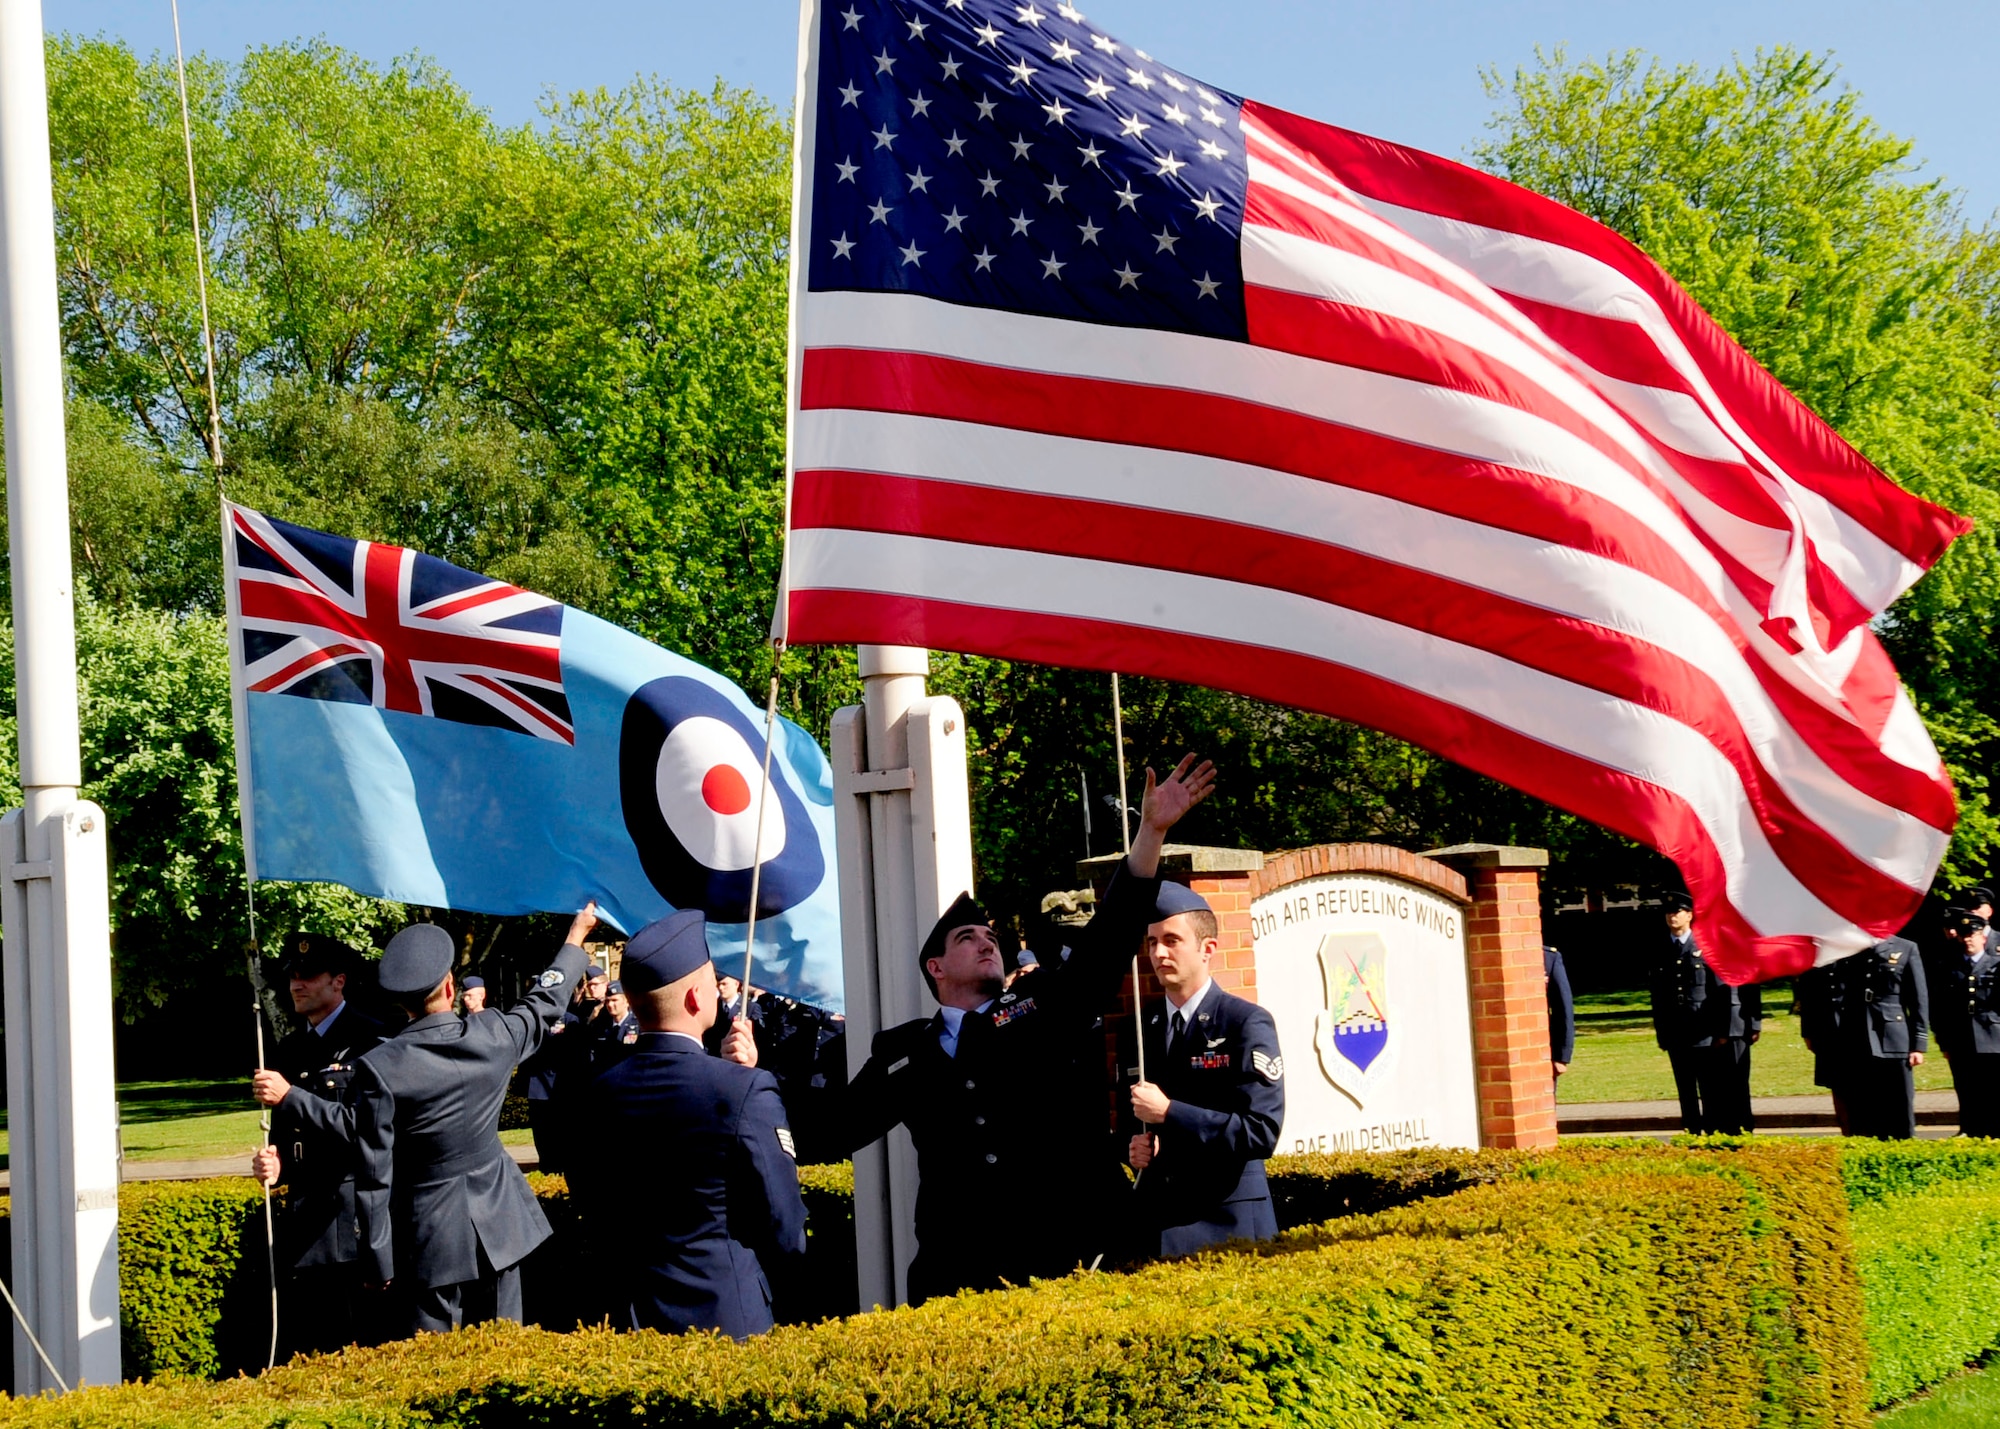 RAF MILDENHALL, England – Team Mildenhall Airmen from the 488th Intelligence Squadron and British airmen from the 51 Squadron, Royal Air Force Waddington, reach to collect both the American flag and the Royal Air Force Ensign in a retreat ceremony here, May 25, 2012. . During retreat the flag is lowered and taken off the pole and a detail of Airmen give it a distinct fold. (U.S. Air Force photo/Senior Airman Ethan Morgan)  